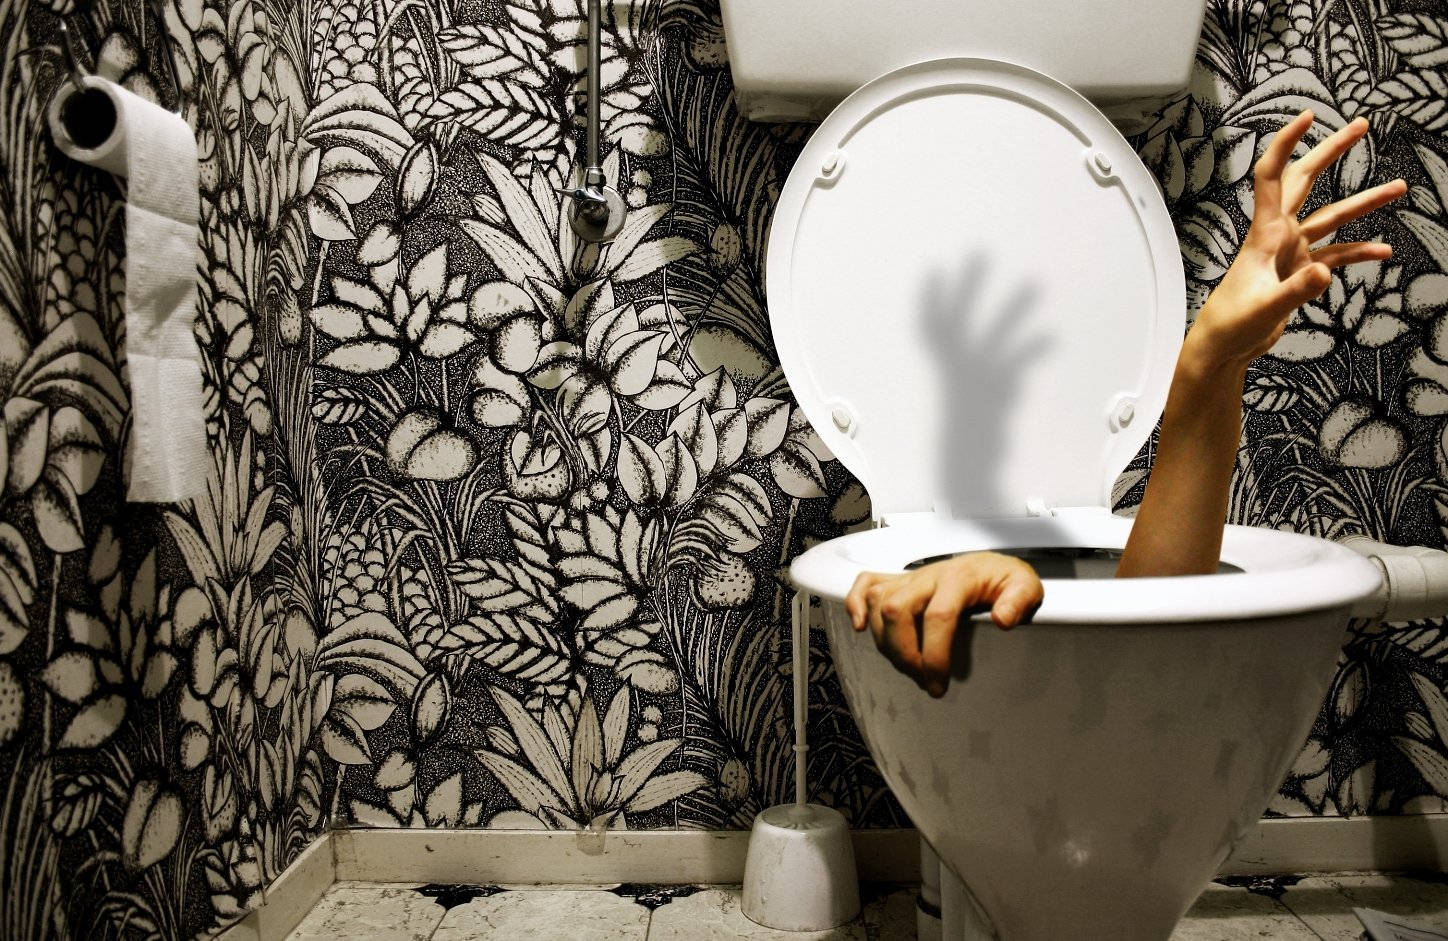 Caption: Unusual Perspective of Modern Toilet Bowl Wallpaper